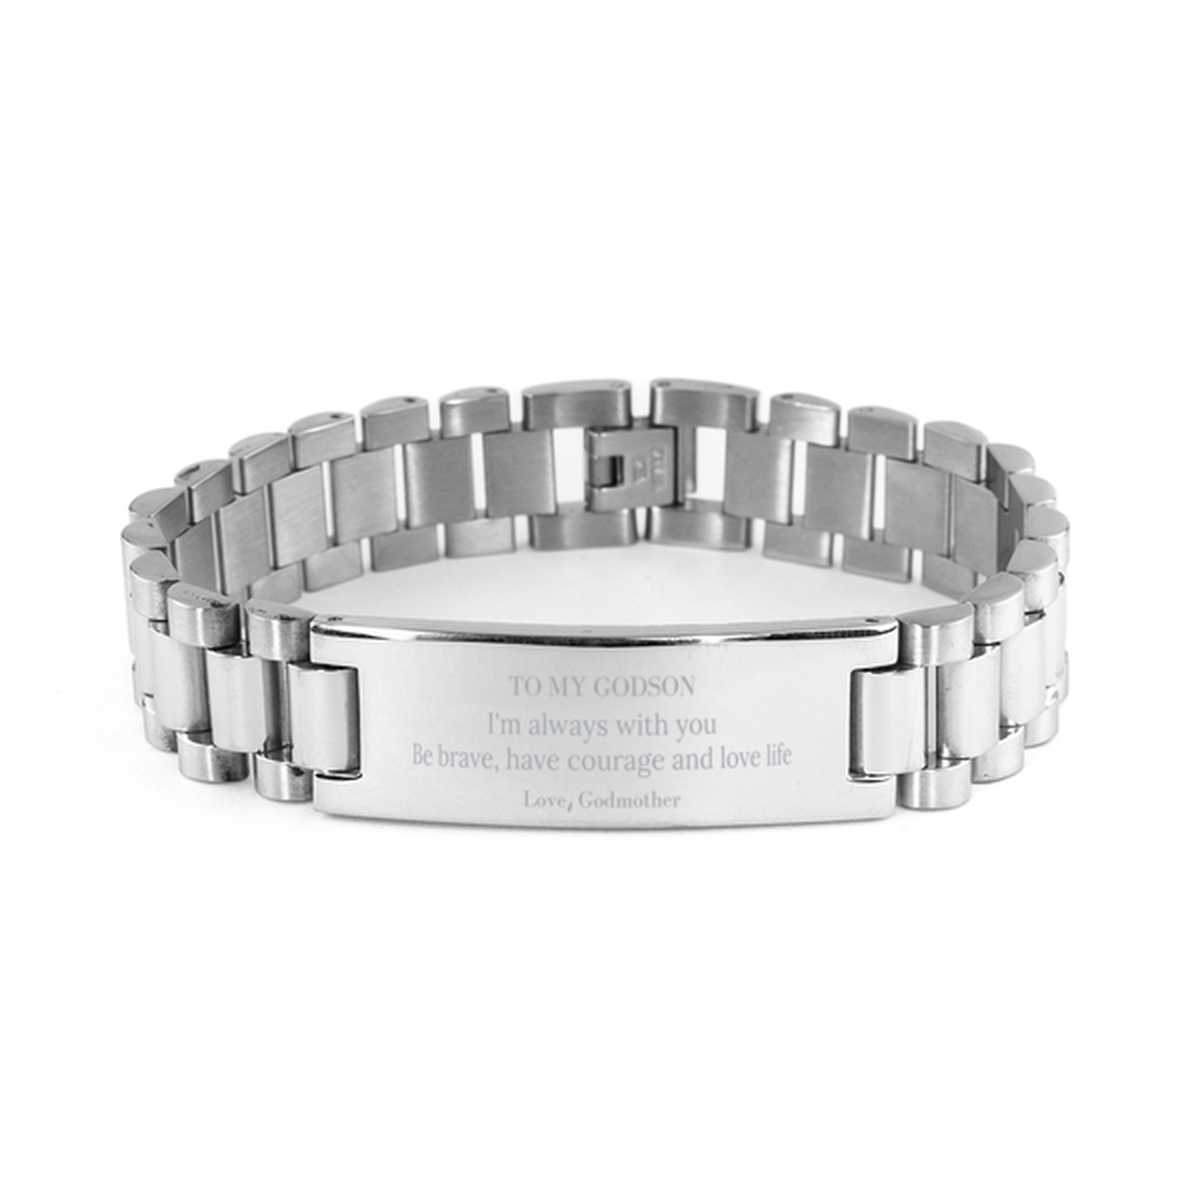 To My Godson Gifts from Godmother, Unique Ladder Stainless Steel Bracelet Inspirational Christmas Birthday Graduation Gifts for Godson I'm always with you. Be brave, have courage and love life. Love, Godmother